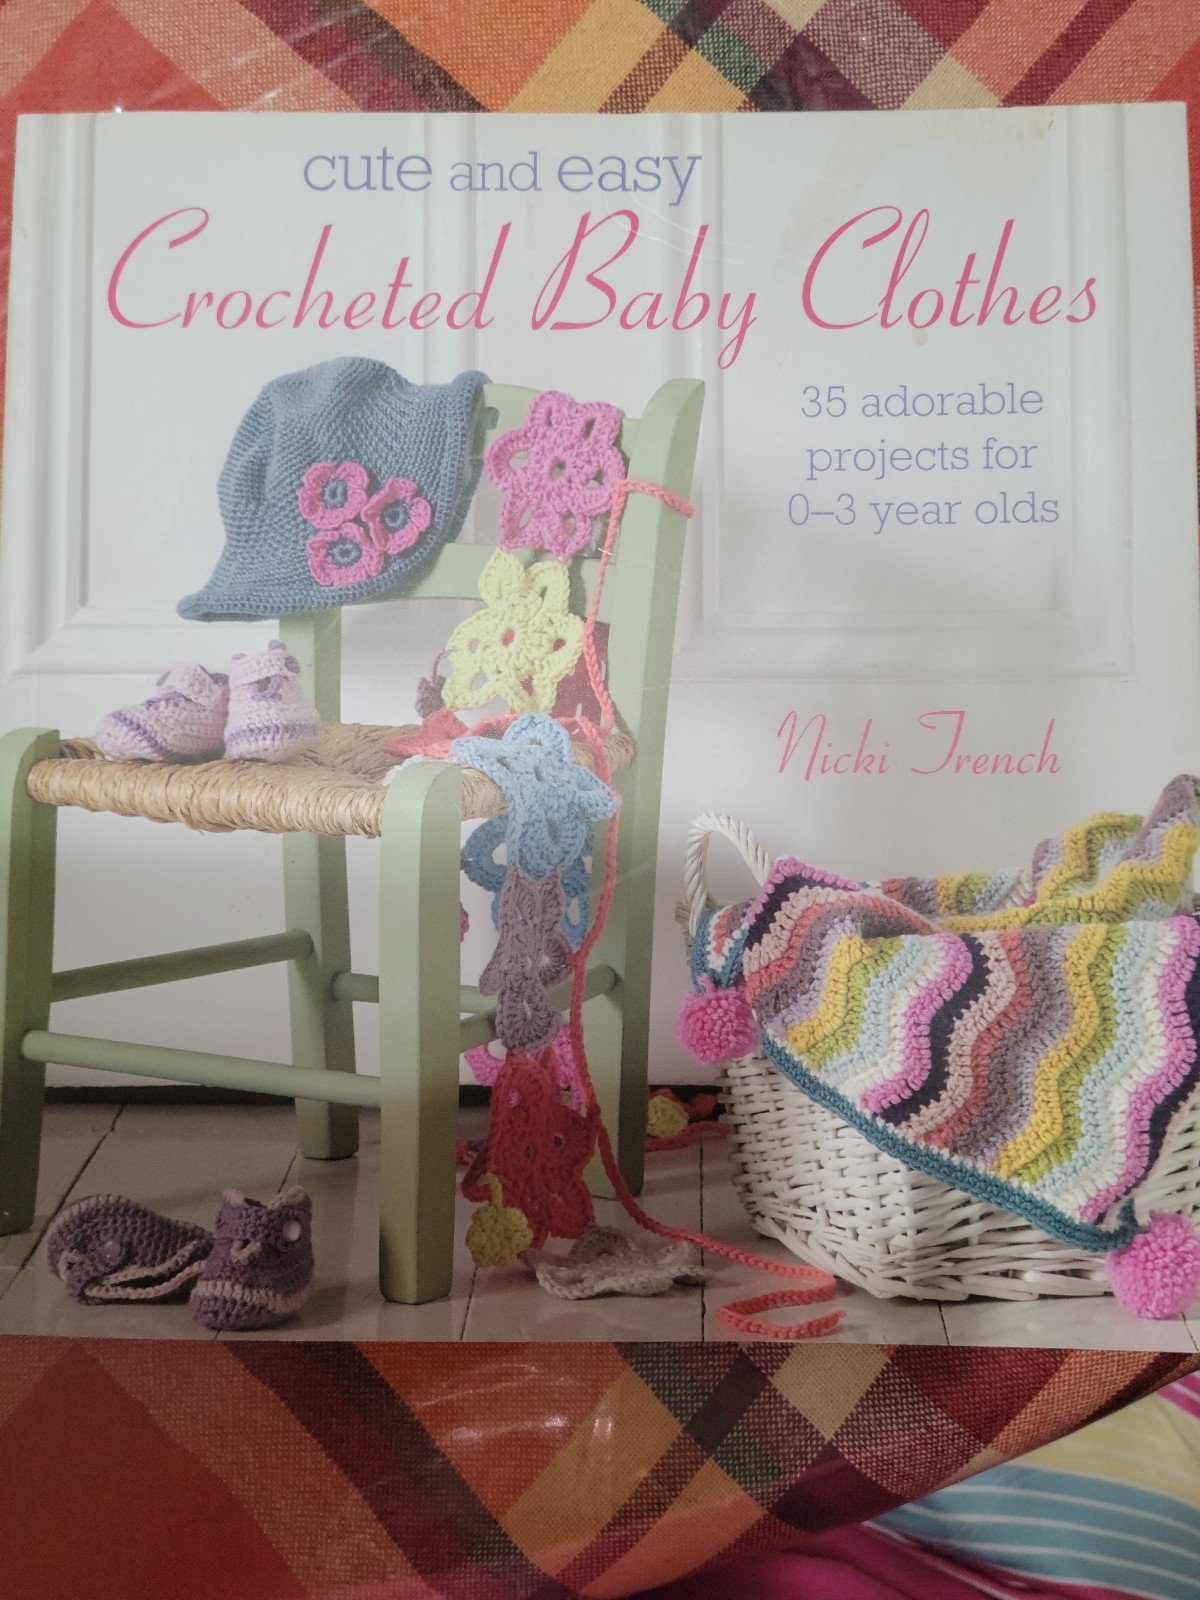 Crochet Baby Clothes Pattern Book eDjqobeB7